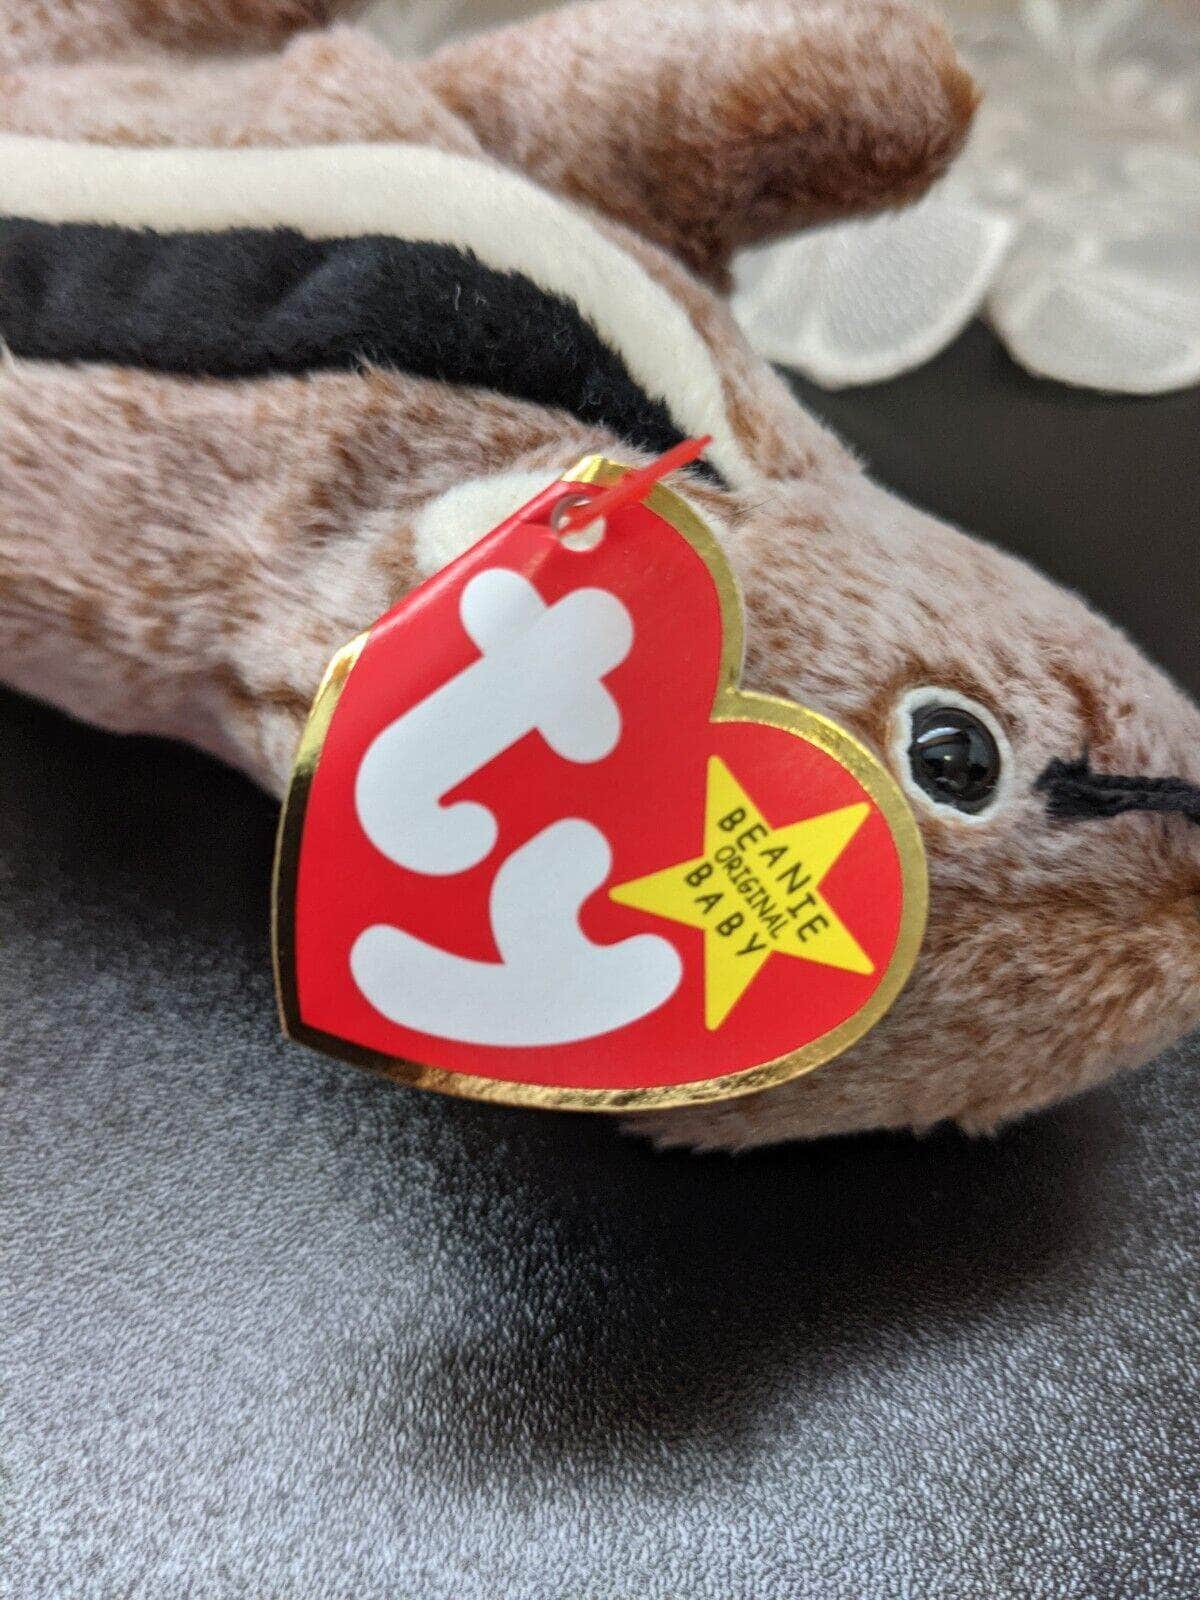 Ty Beanie Baby - Chipper The Chipmunk (6.5in) - Vintage Beanies Canada